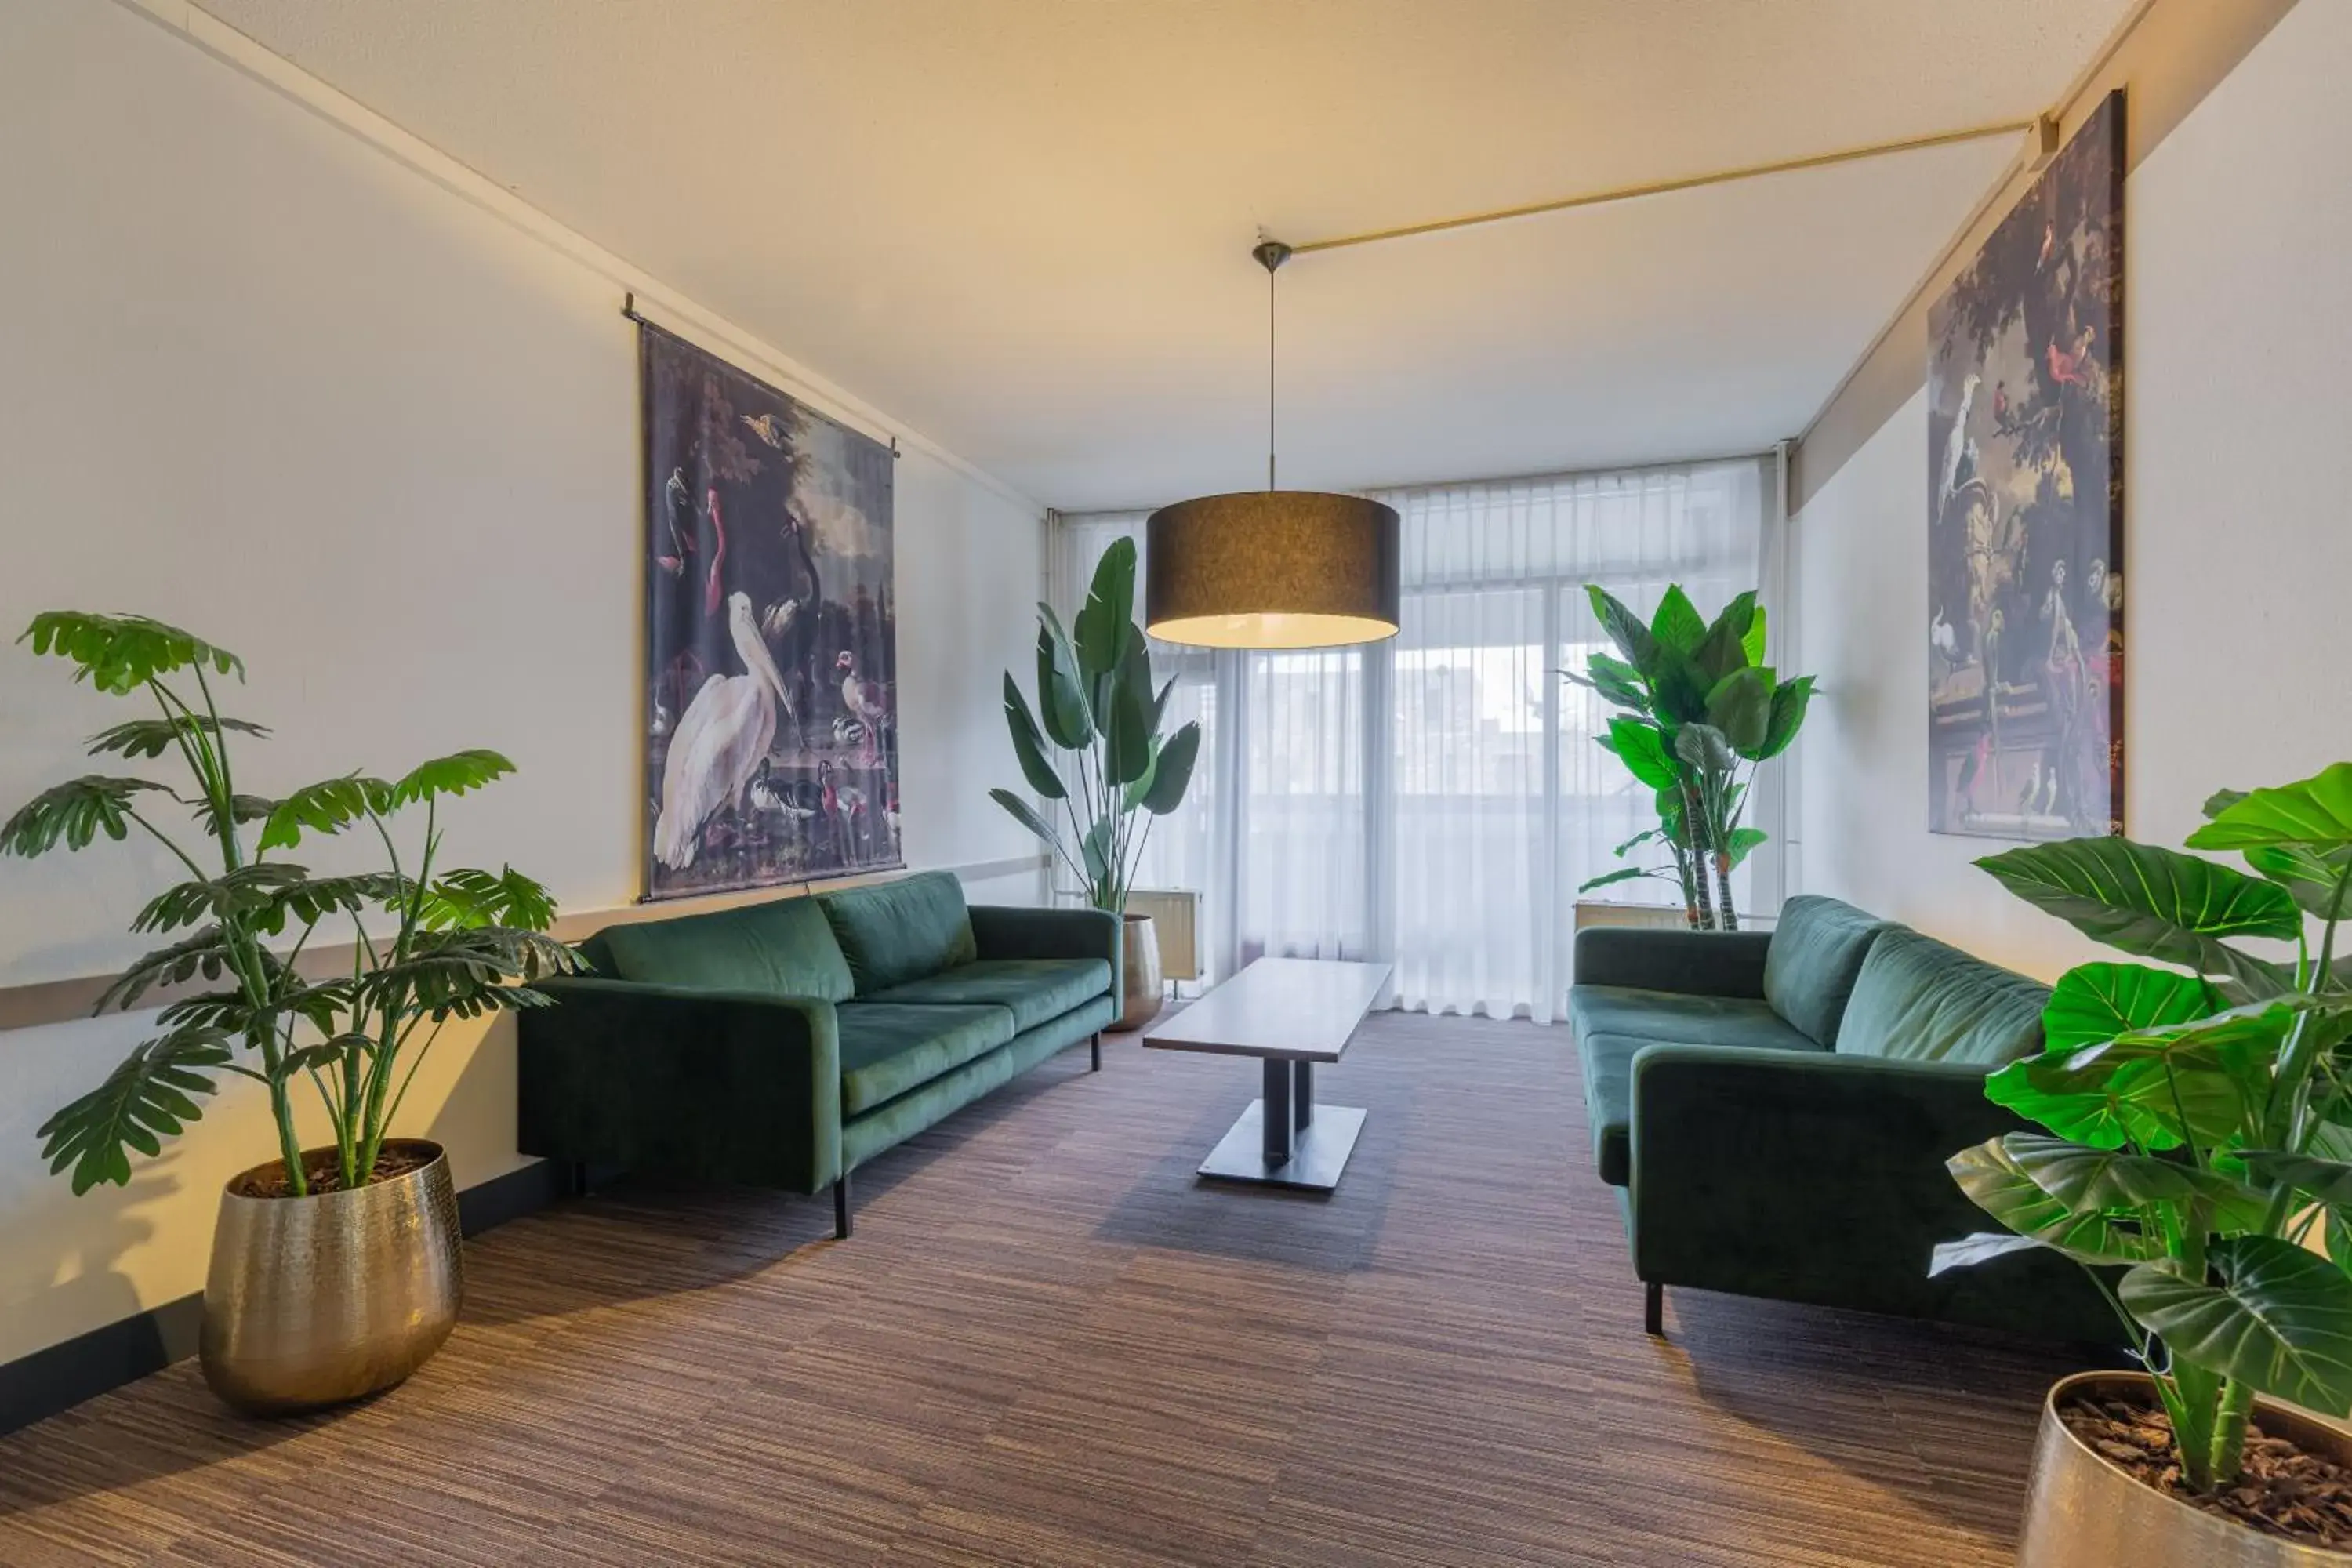 Area and facilities in New West Inn Amsterdam